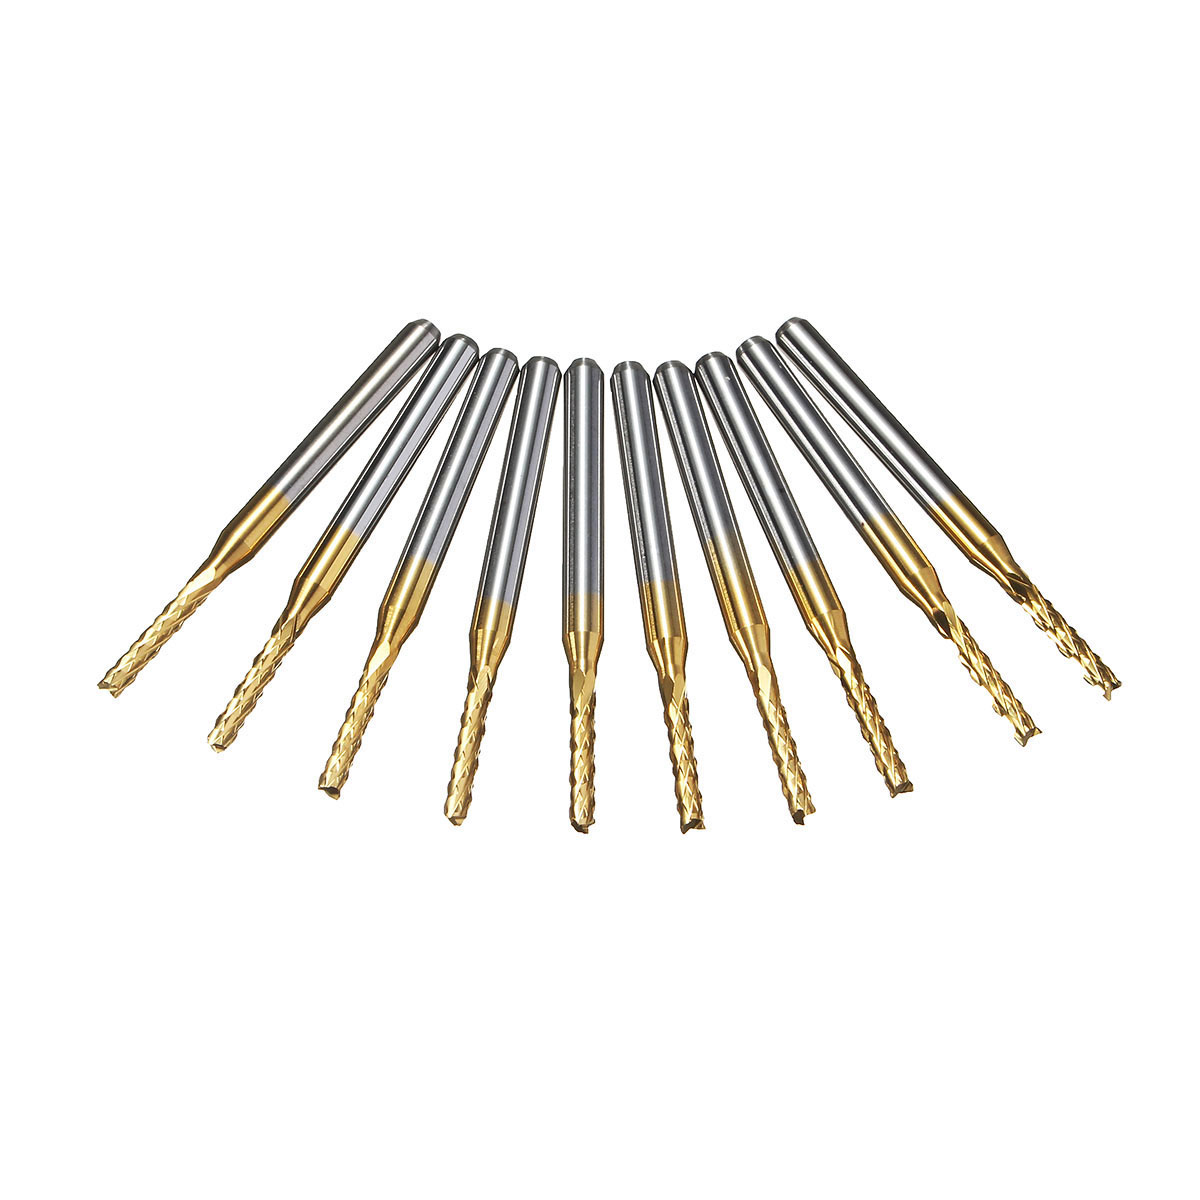 

Drillpro 10pcs 1.8mm Titanium Coated Engraving Milling Cutter Carbide End Mill Cutter